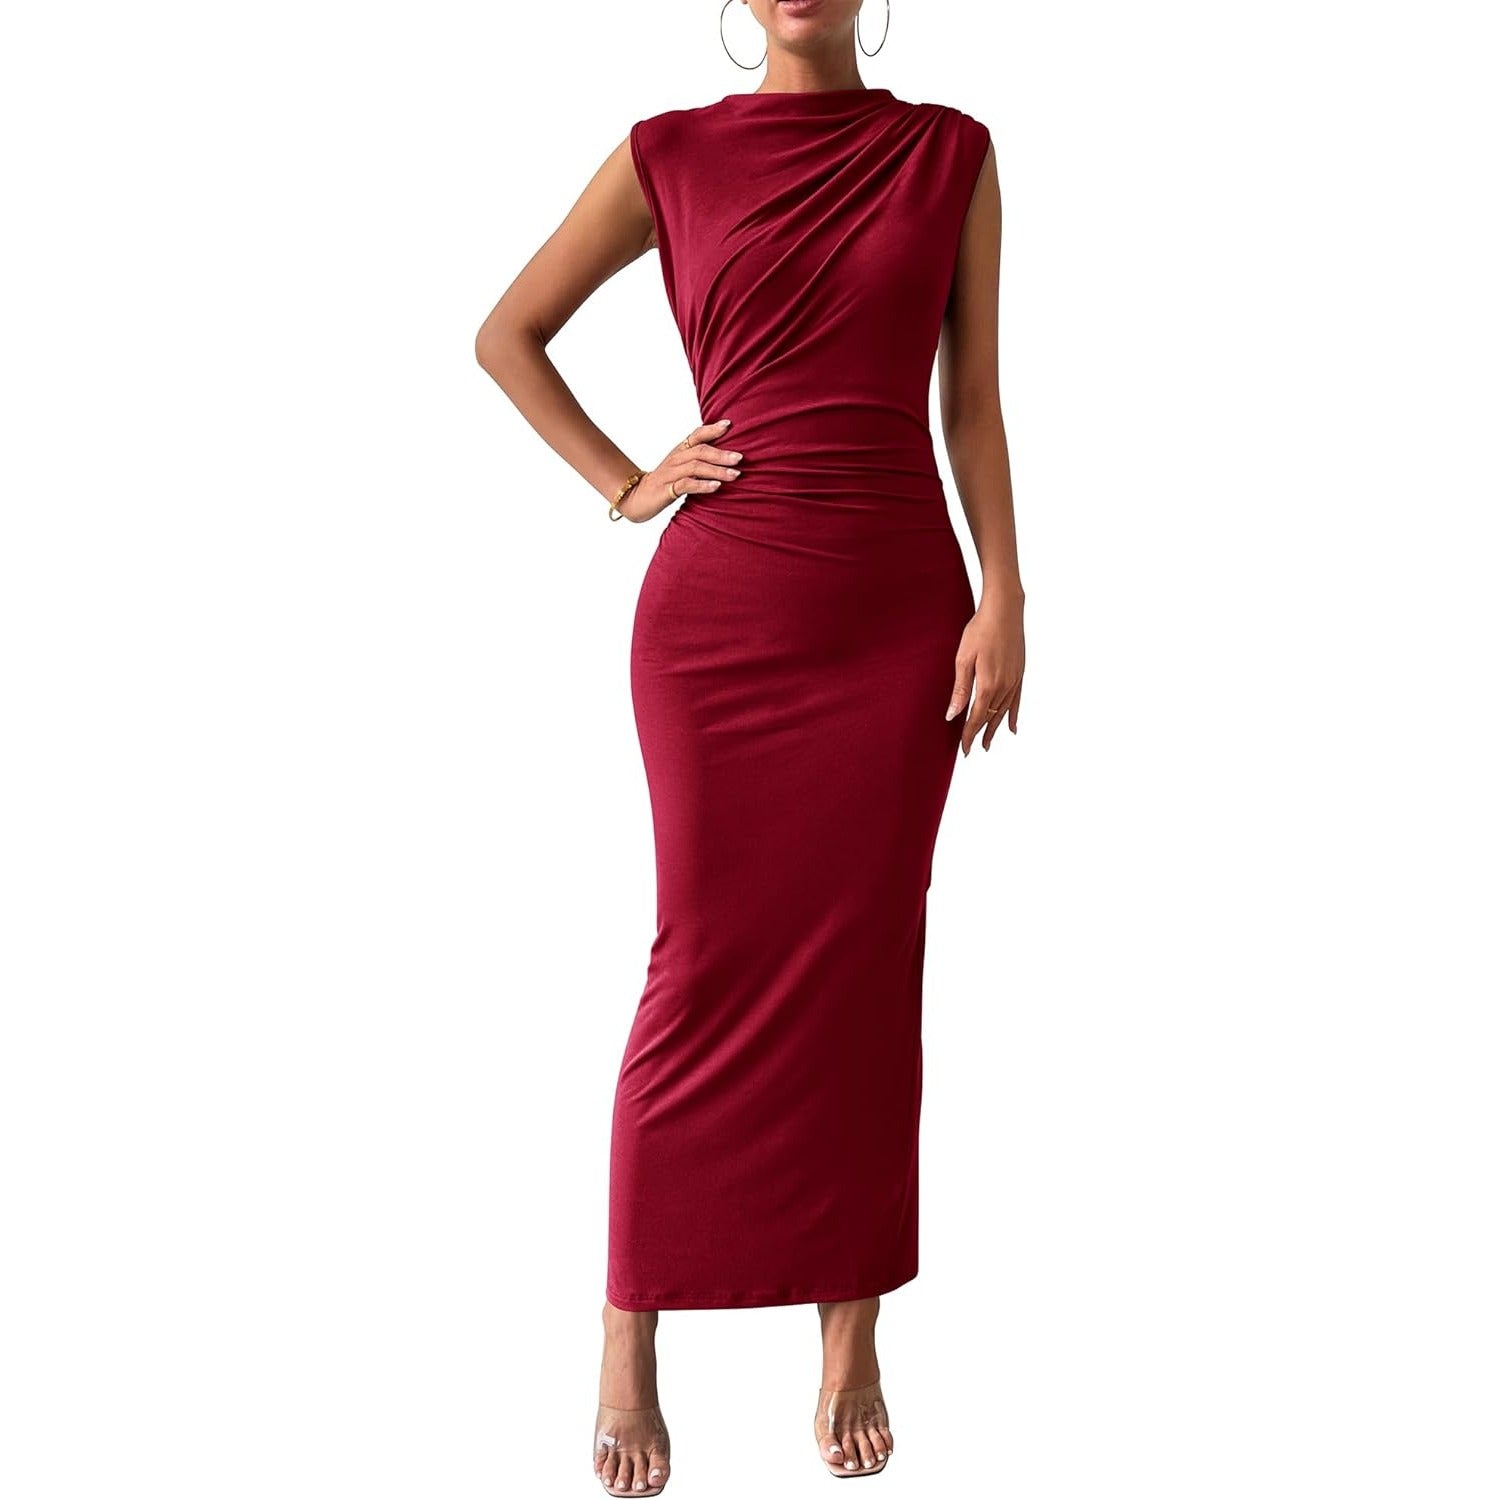 Women's Ruched Bodycon Dress Summer Casual Sleeveless Back Slit Elegant Club Evening Party Cocktail Maxi Dresses